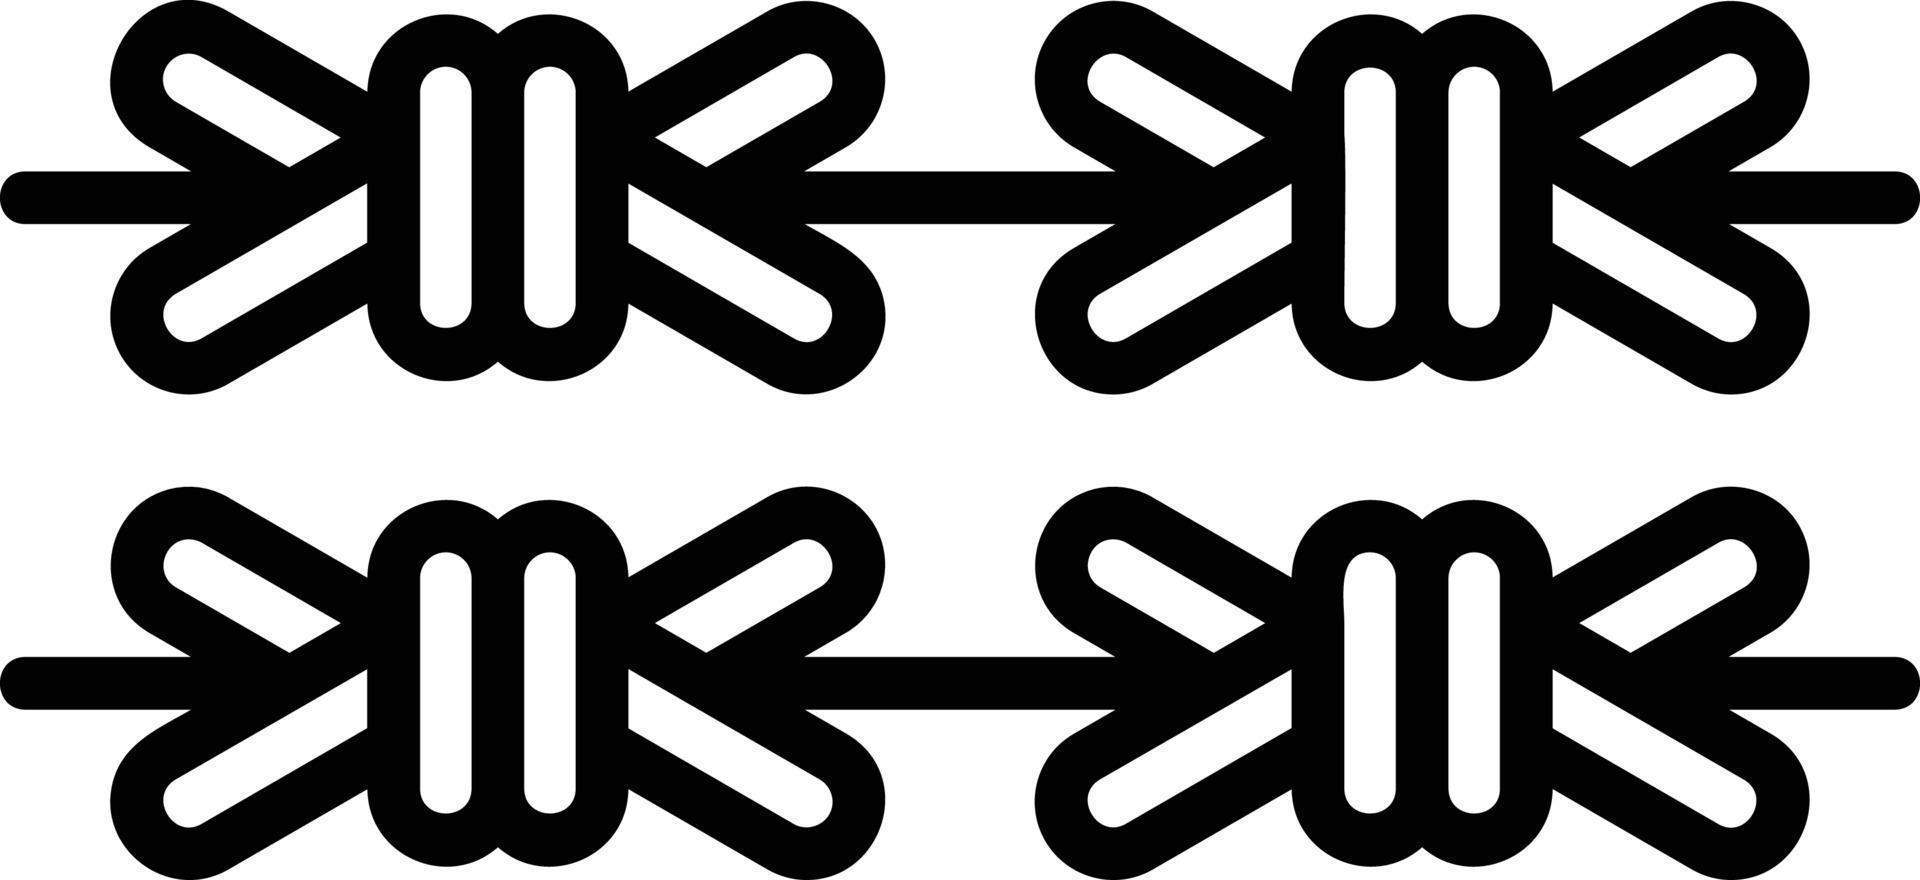 Barbed Wire Line Icon vector